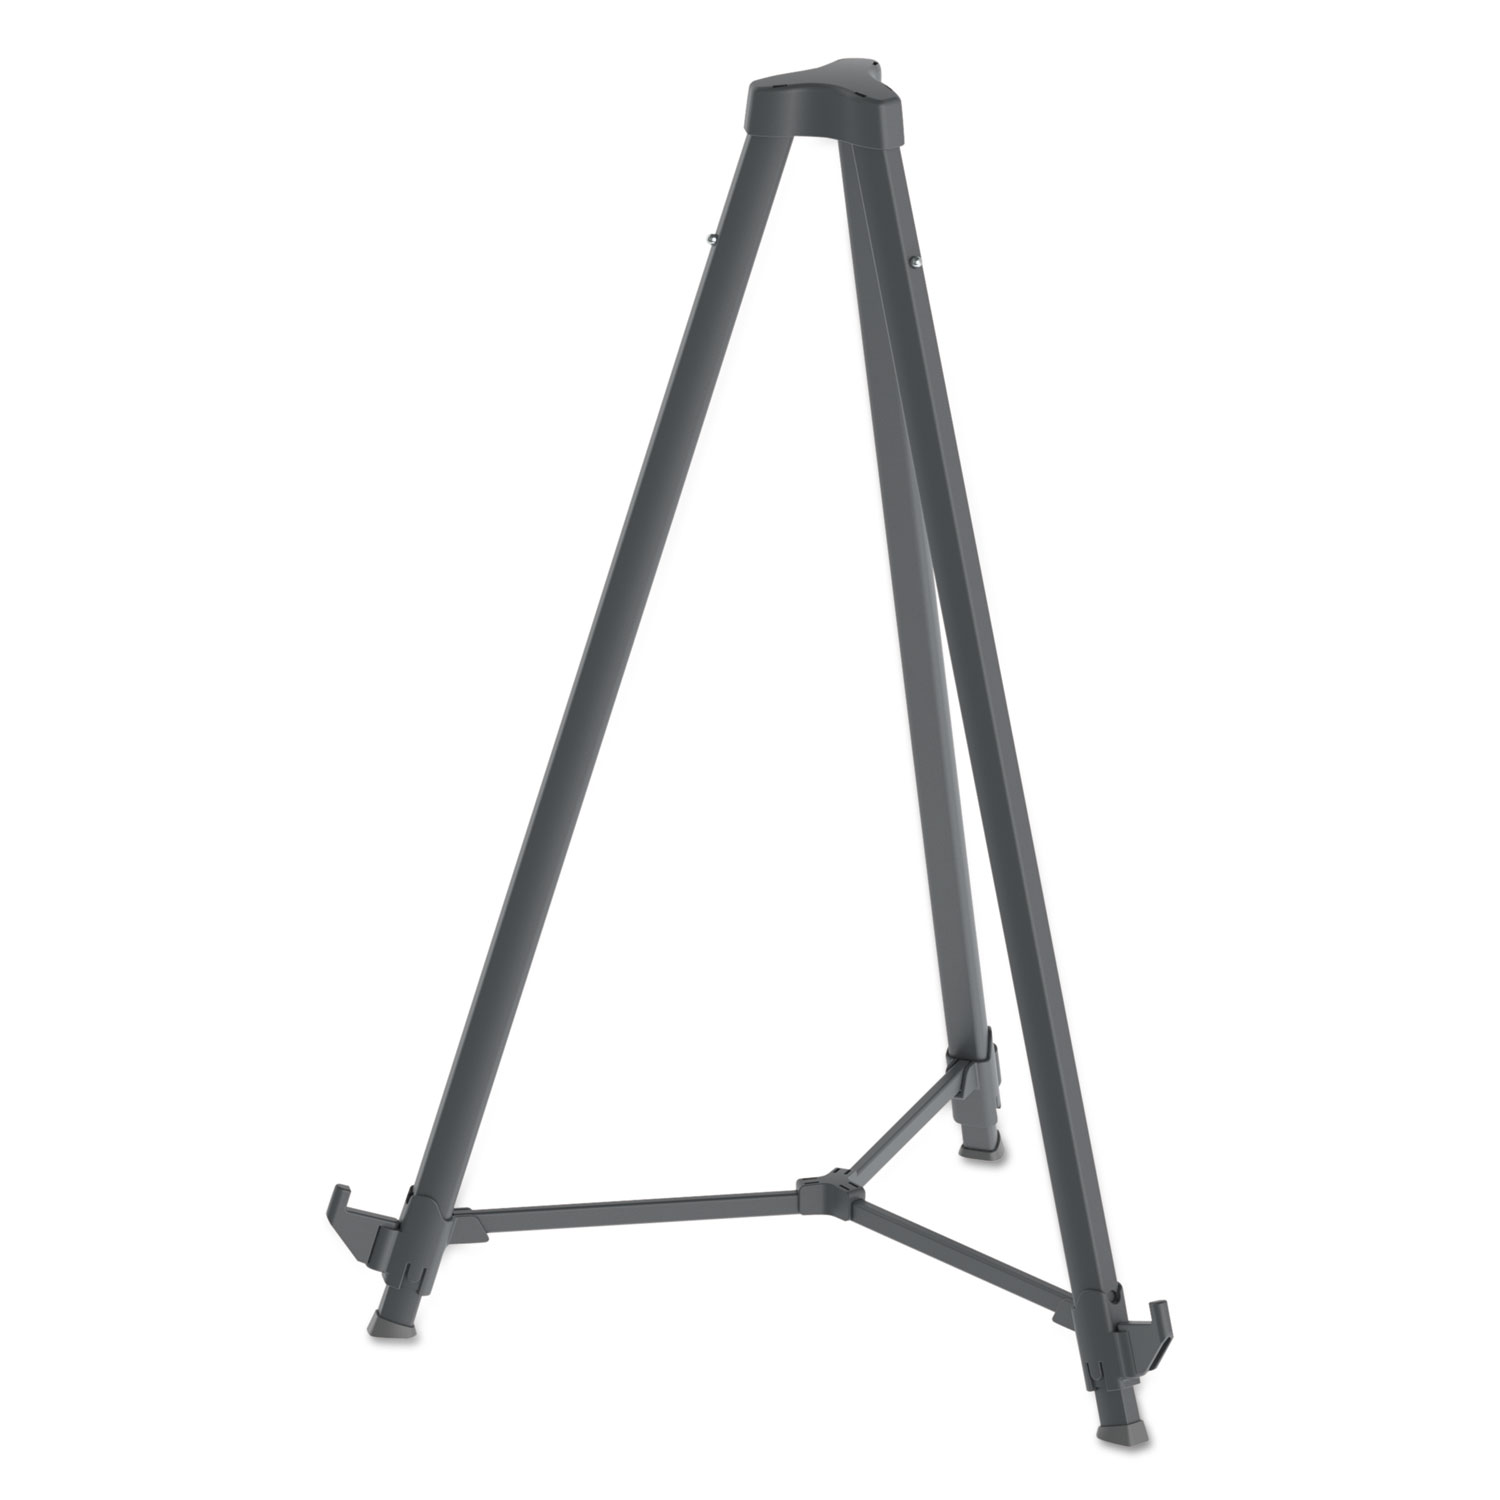 MasterVision 3-Leg Heavy-Duty Telescoping Display Easel Adjustable Height from 37.5 to 69 Inches Black FLX05101MV